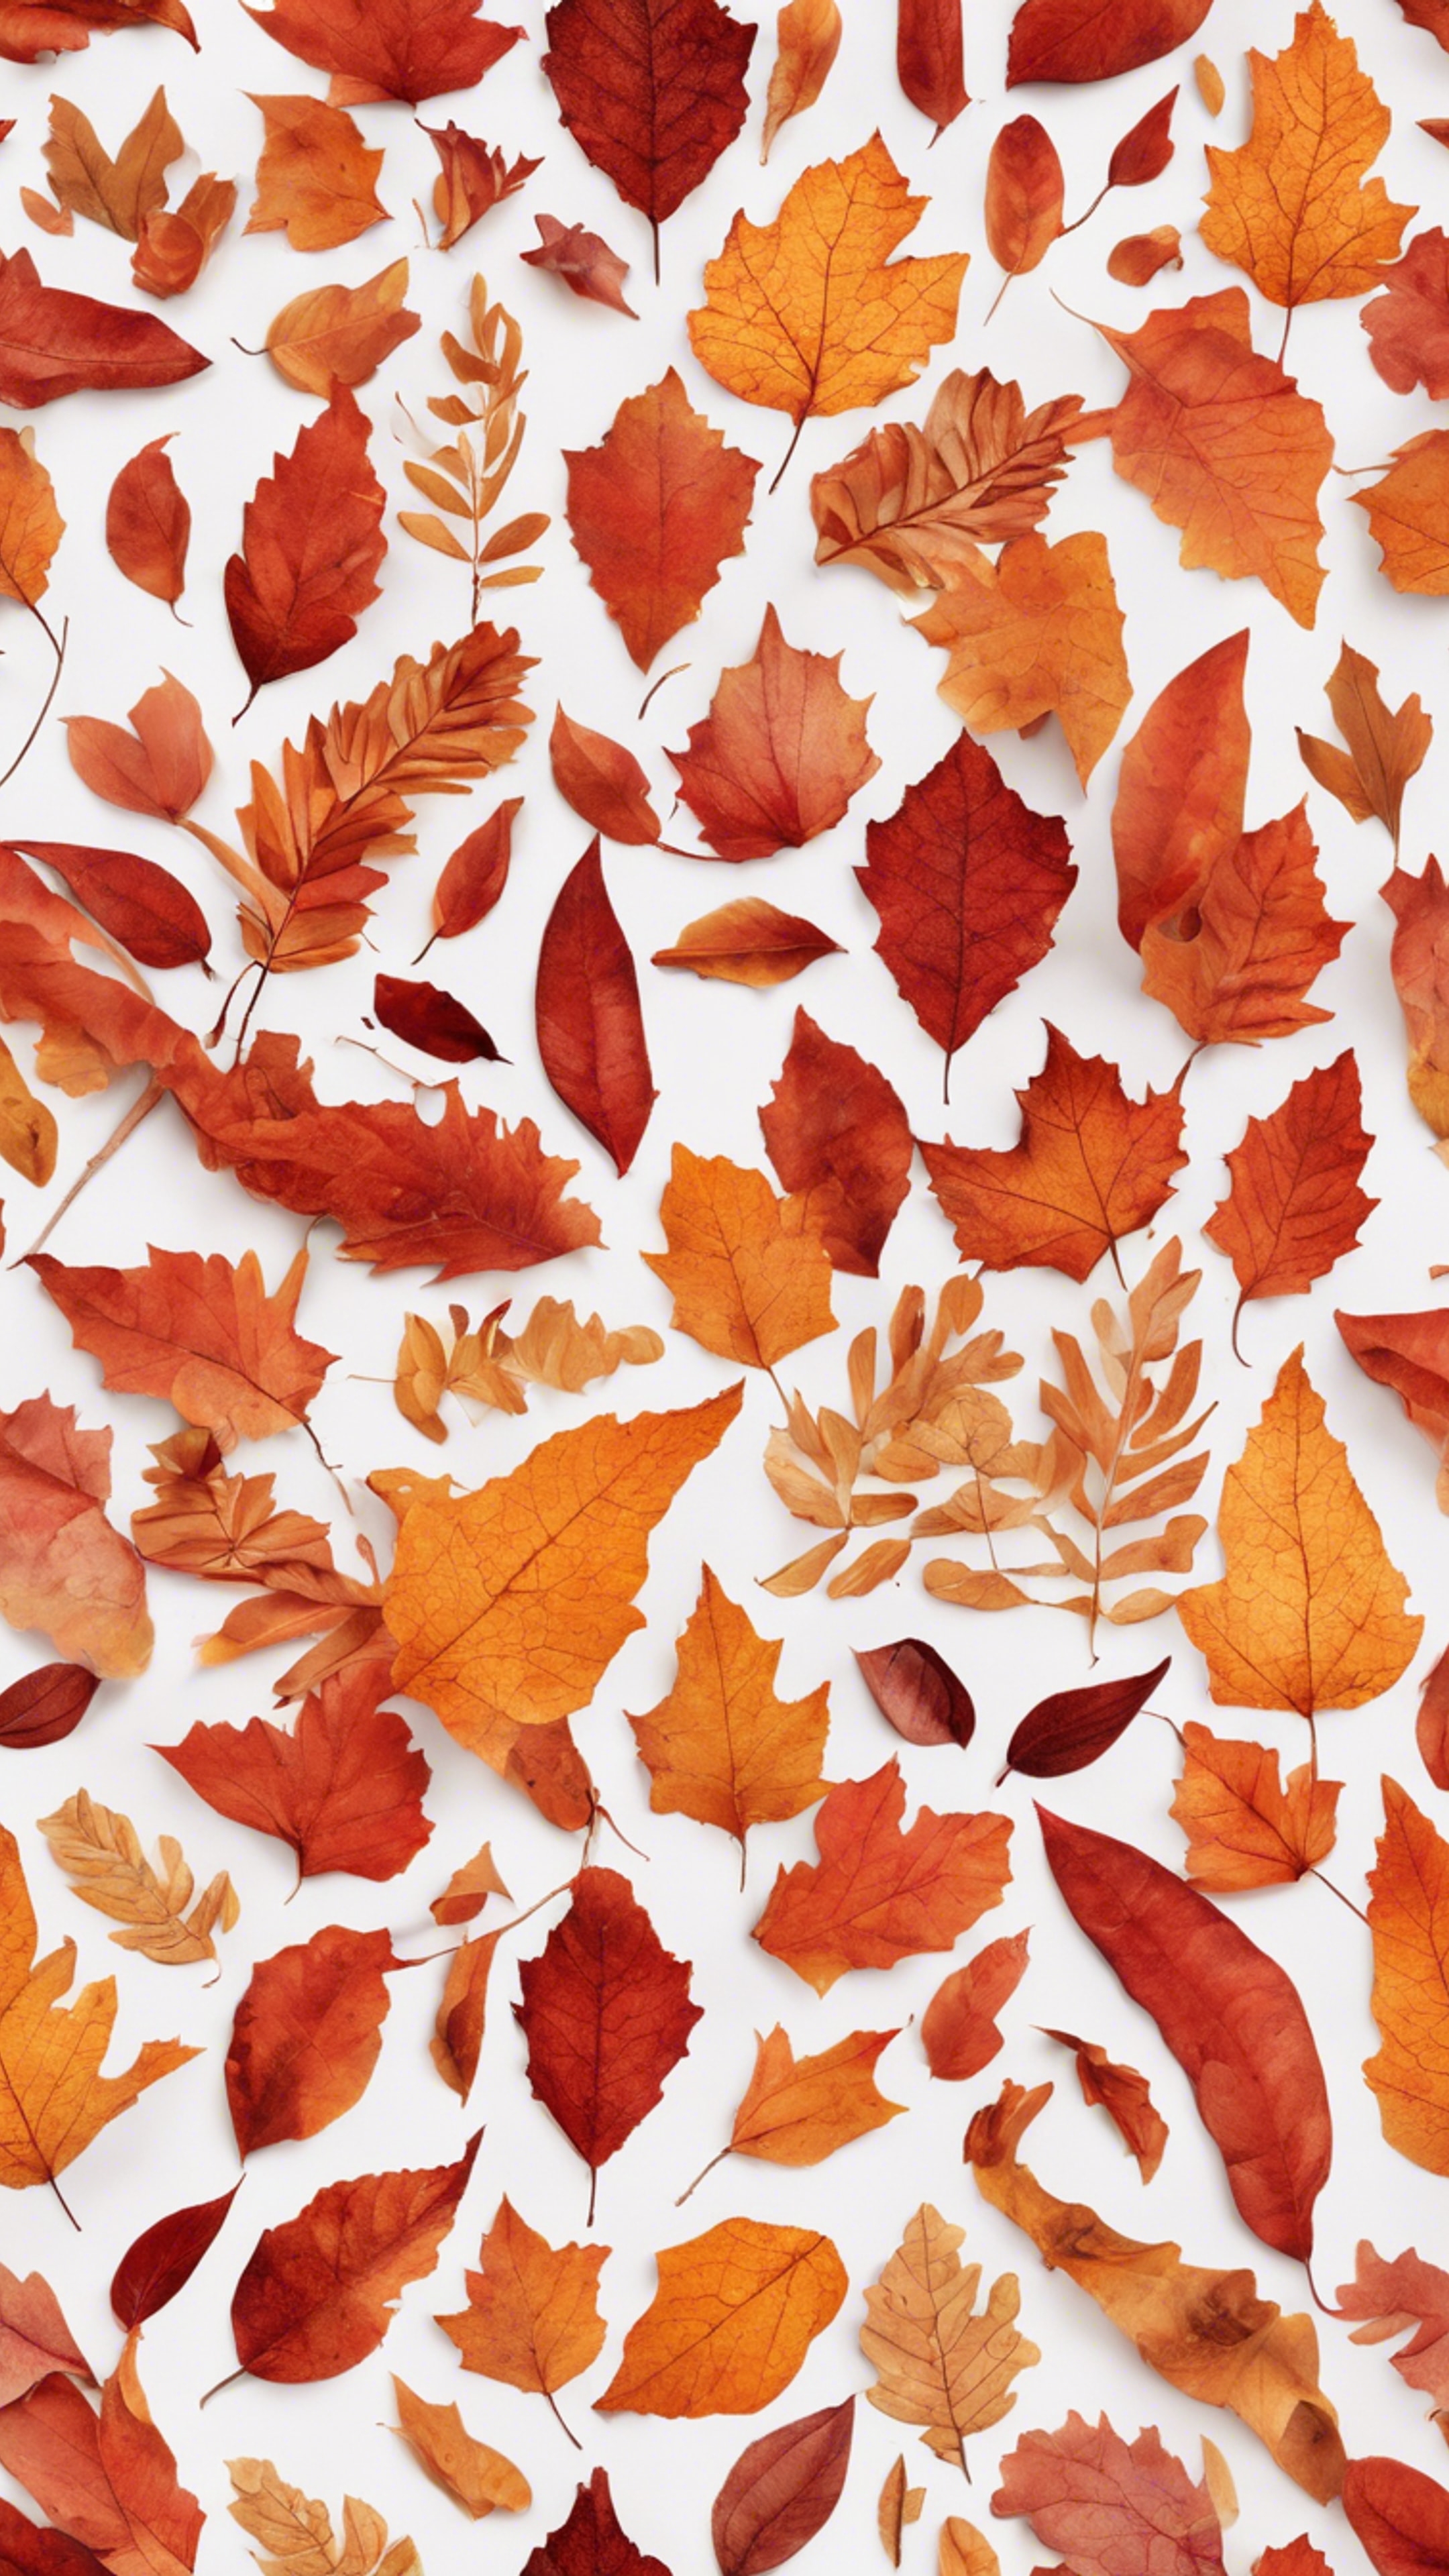 A fiery autumn pattern, reminiscent of falling leaves, in a seamless mix of red and orange. Tapeta na zeď[40781a28d8554bd2886e]